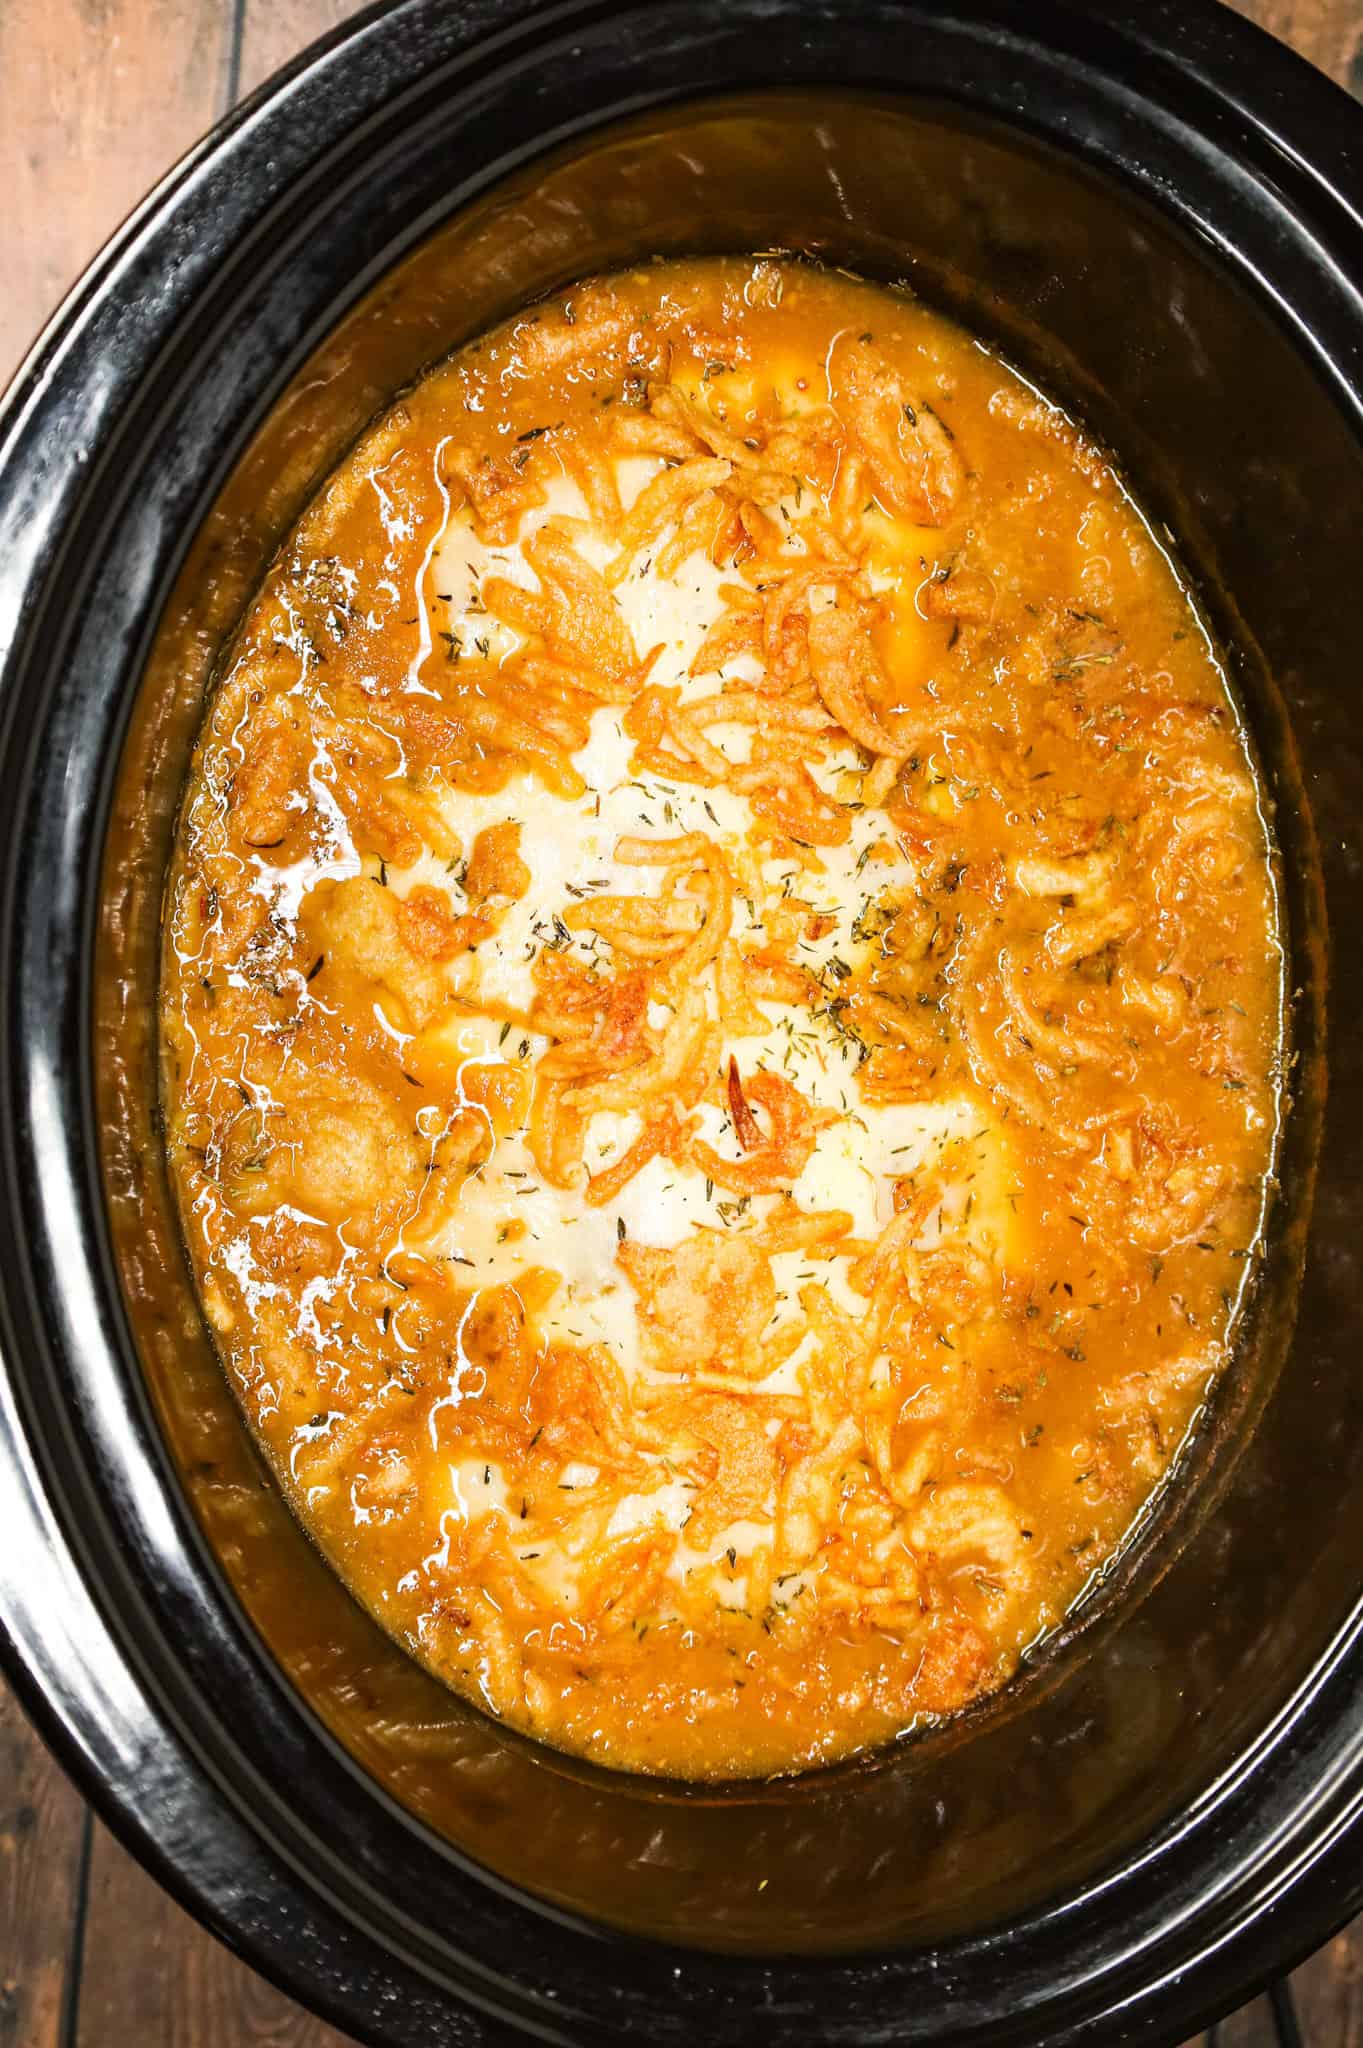 Crock Pot French Onion Chicken is an easy slow cooker chicken breasts recipe made with beef broth, onion soup mix, yellow onions, cream of chicken soup, provolone cheese and French's crispy fried onions.